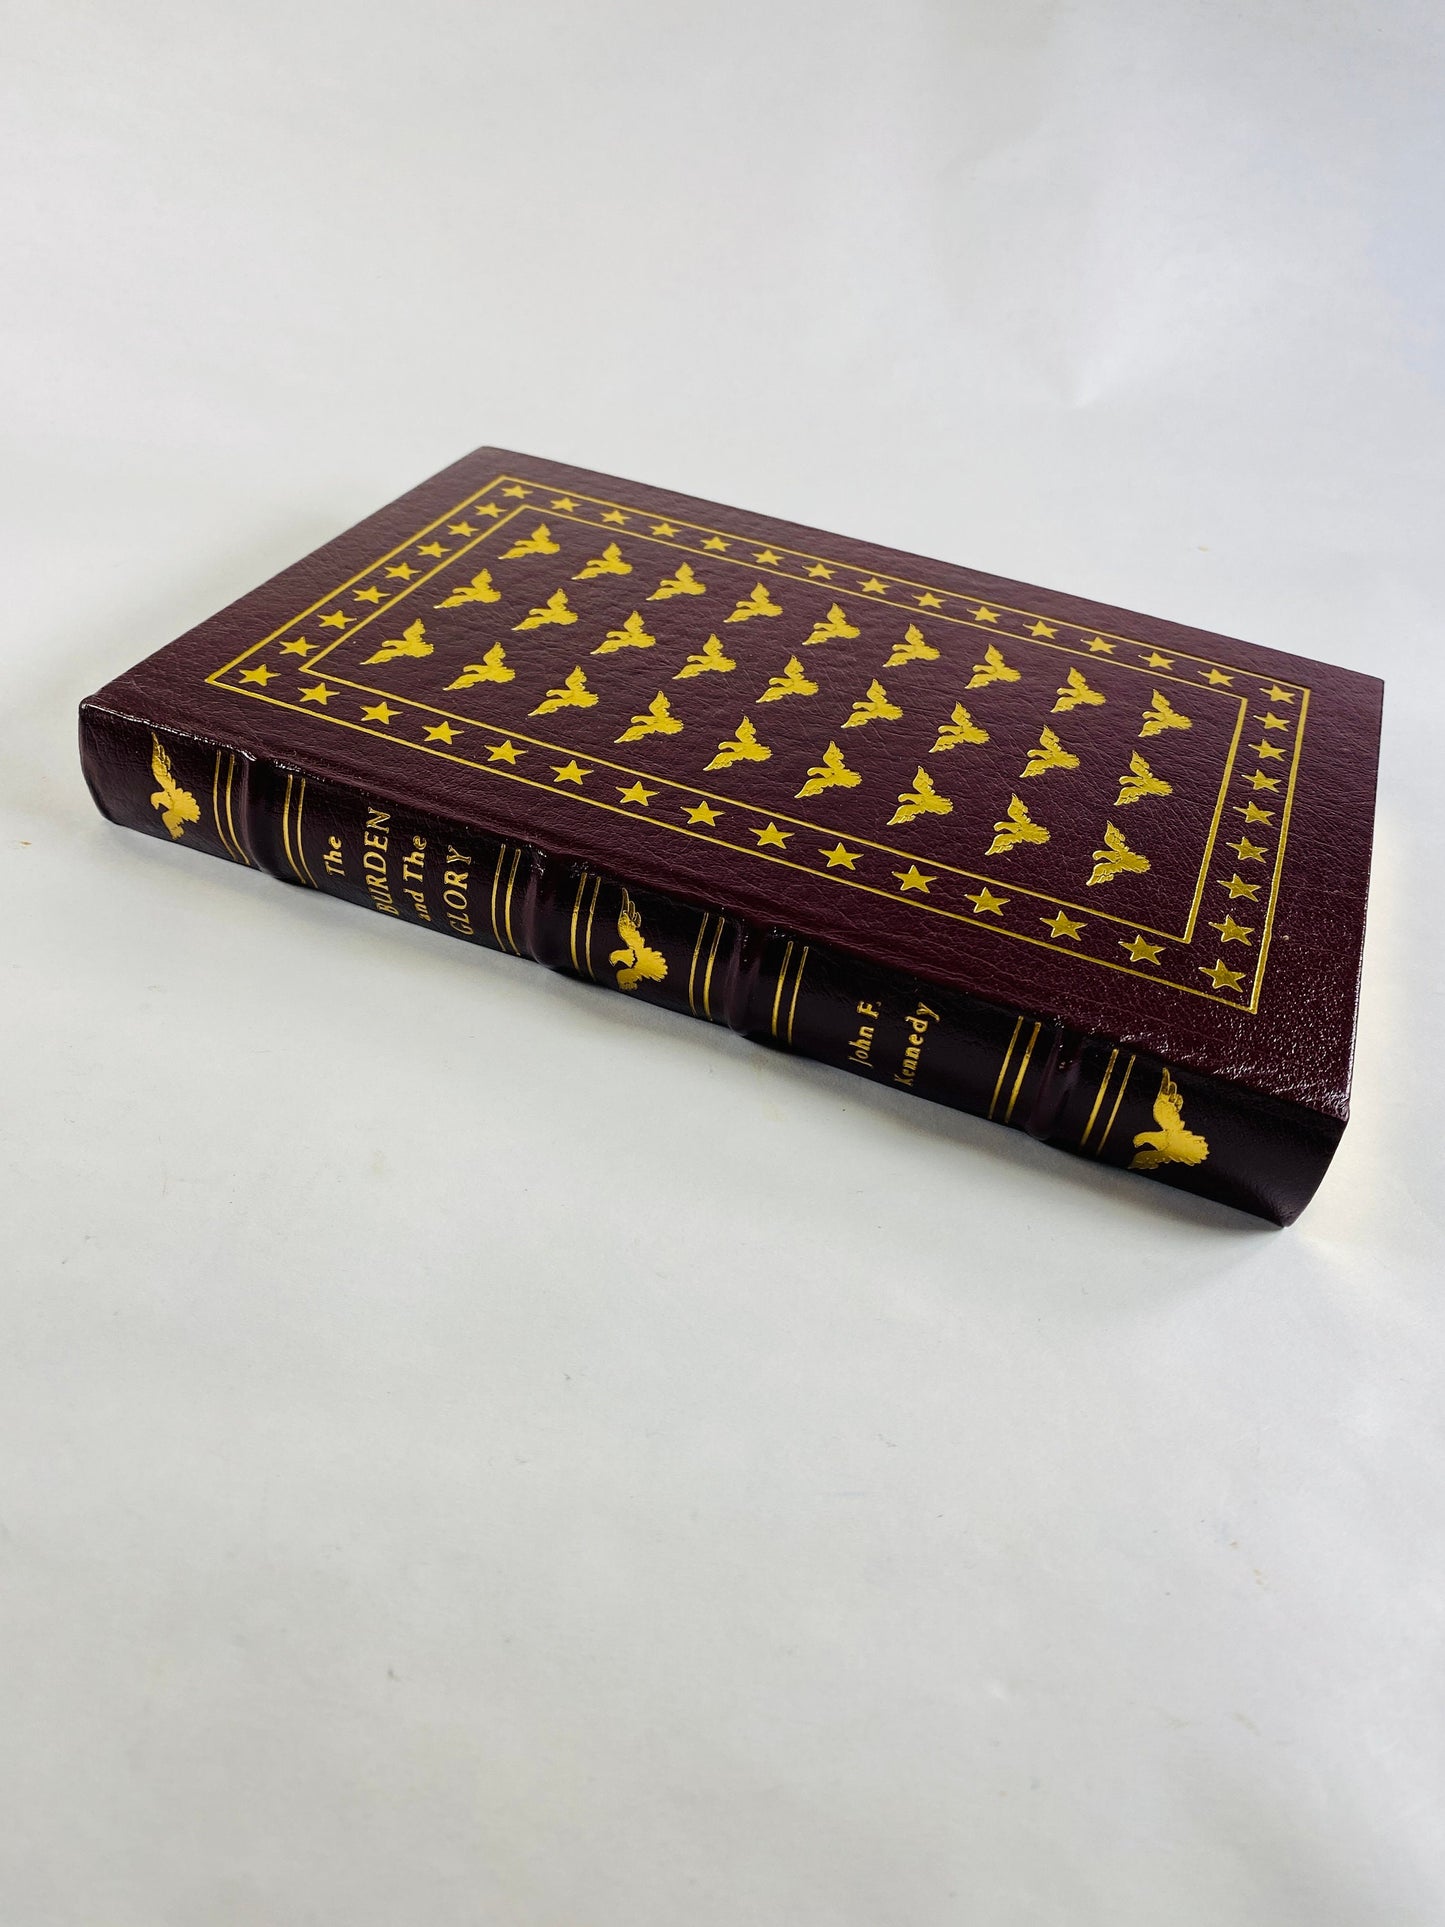 Burden and the Glory by John F Kennedy Vintage Easton Press book edited by Allan Nevins BEAUTIFUL maroon leather with gold gilt